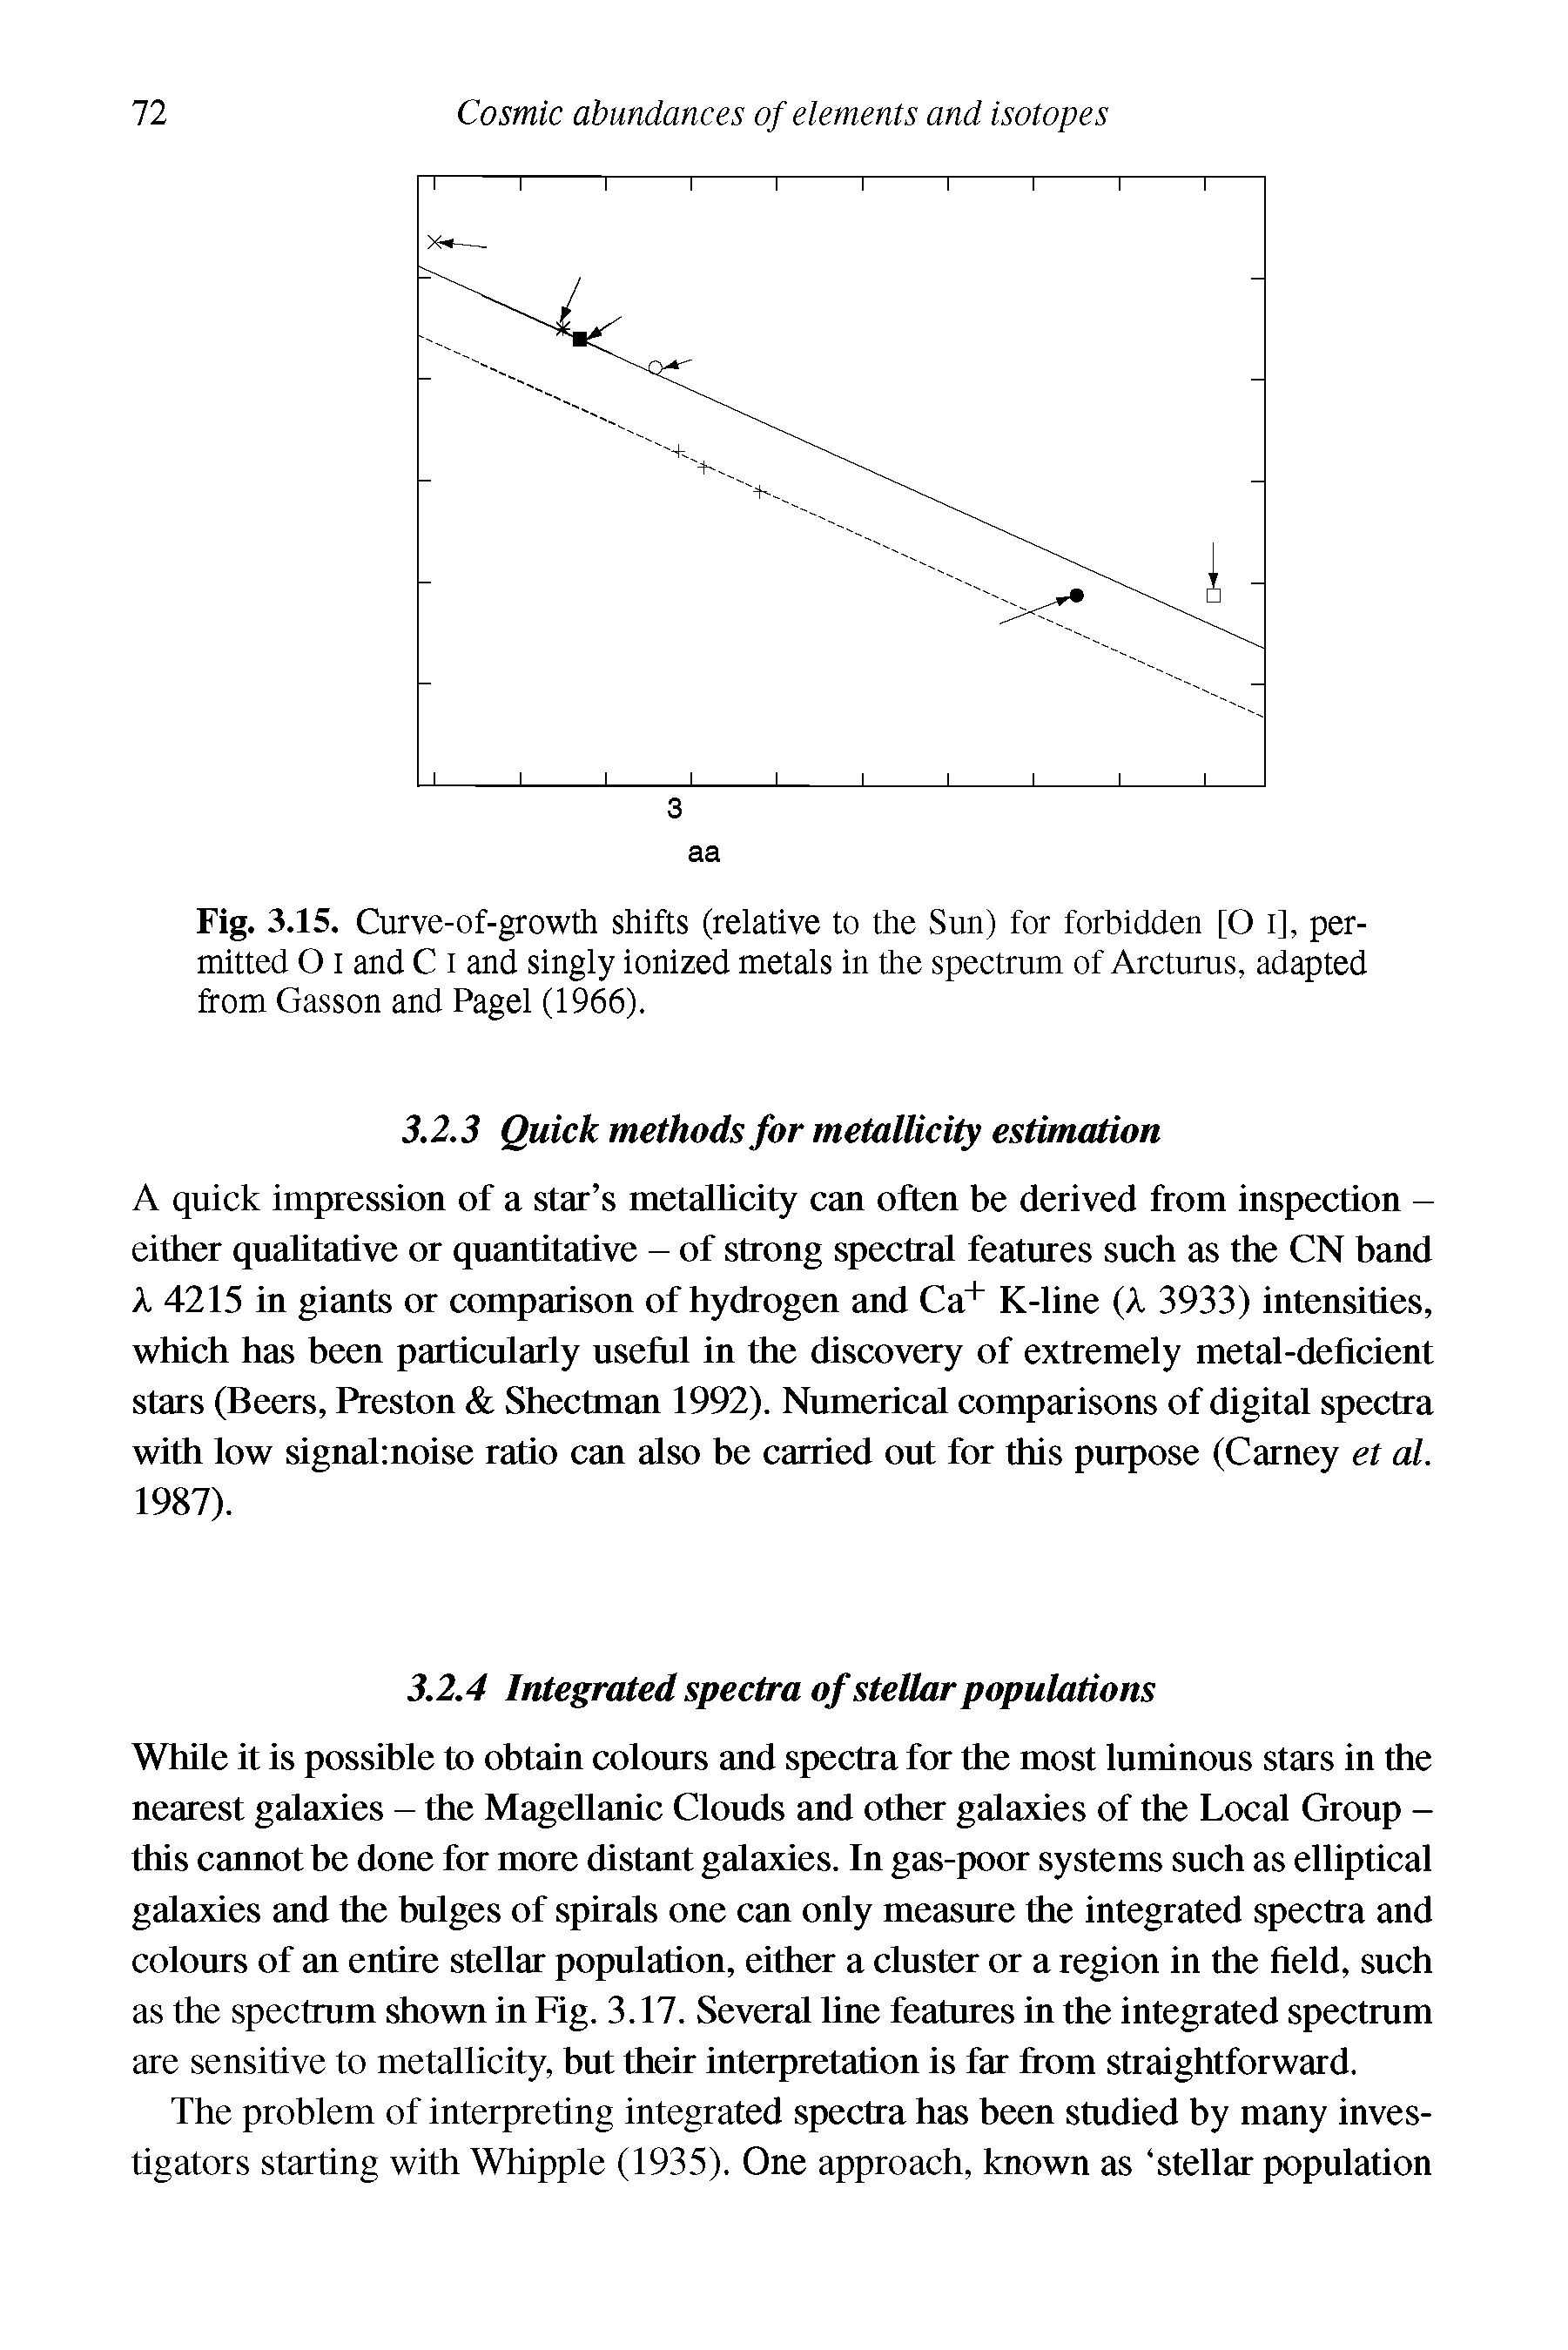 Fig. 3.15. Curve-of-growth shifts (relative to the Sun) for forbidden [O i], permitted O i and C i and singly ionized metals in the spectrum of Arcturus, adapted from Gasson and Pagel (1966).